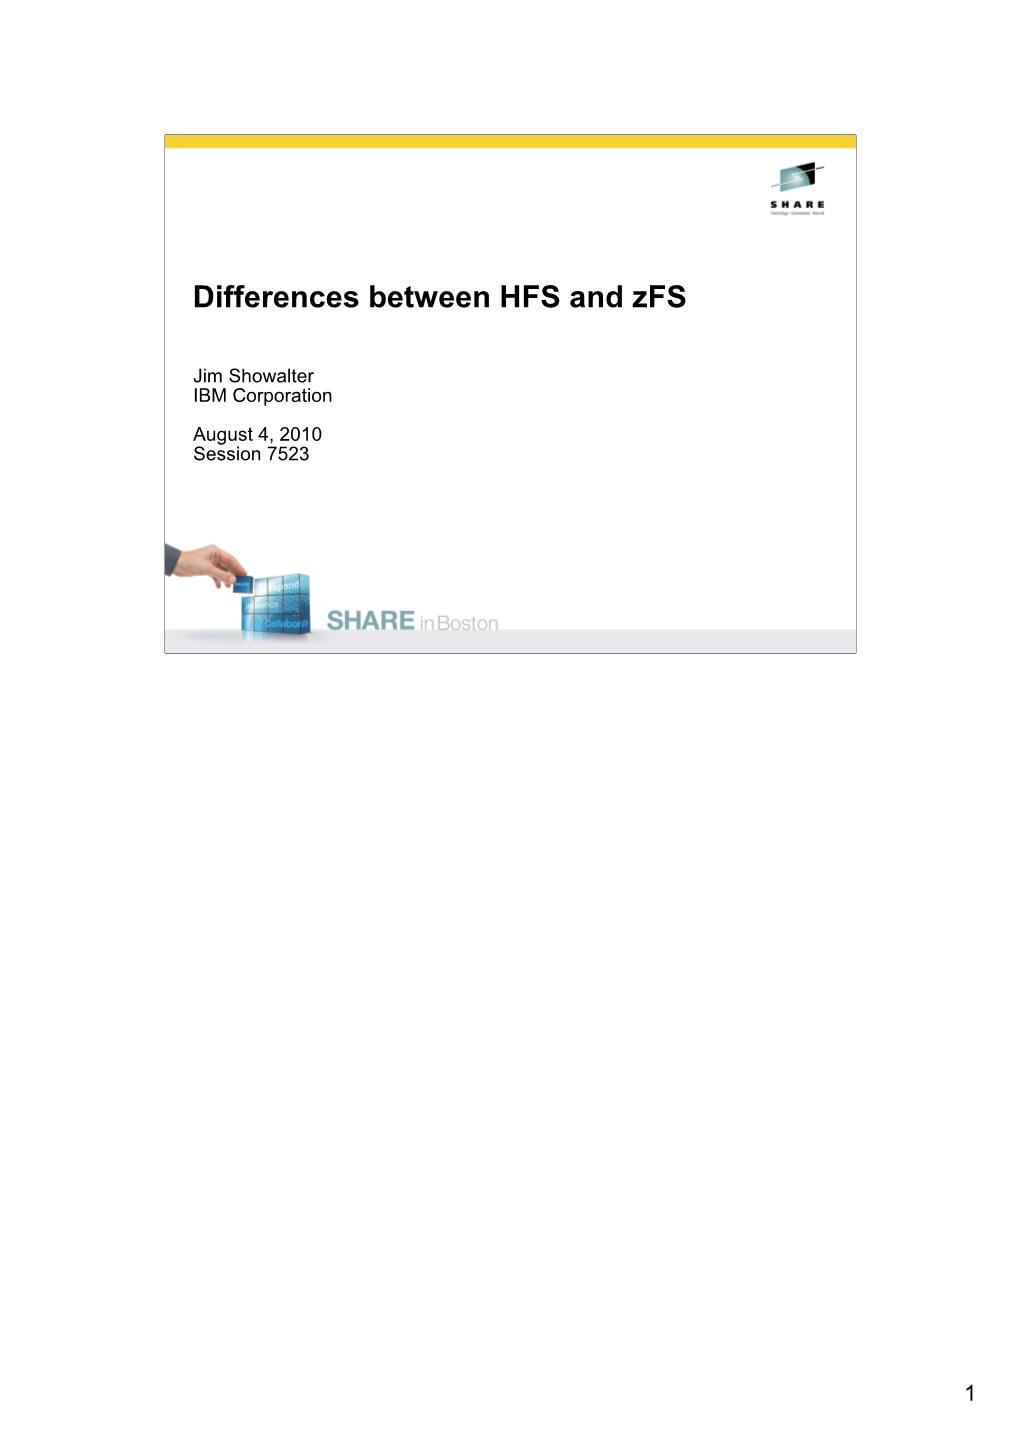 Differences Between HFS and Zfs